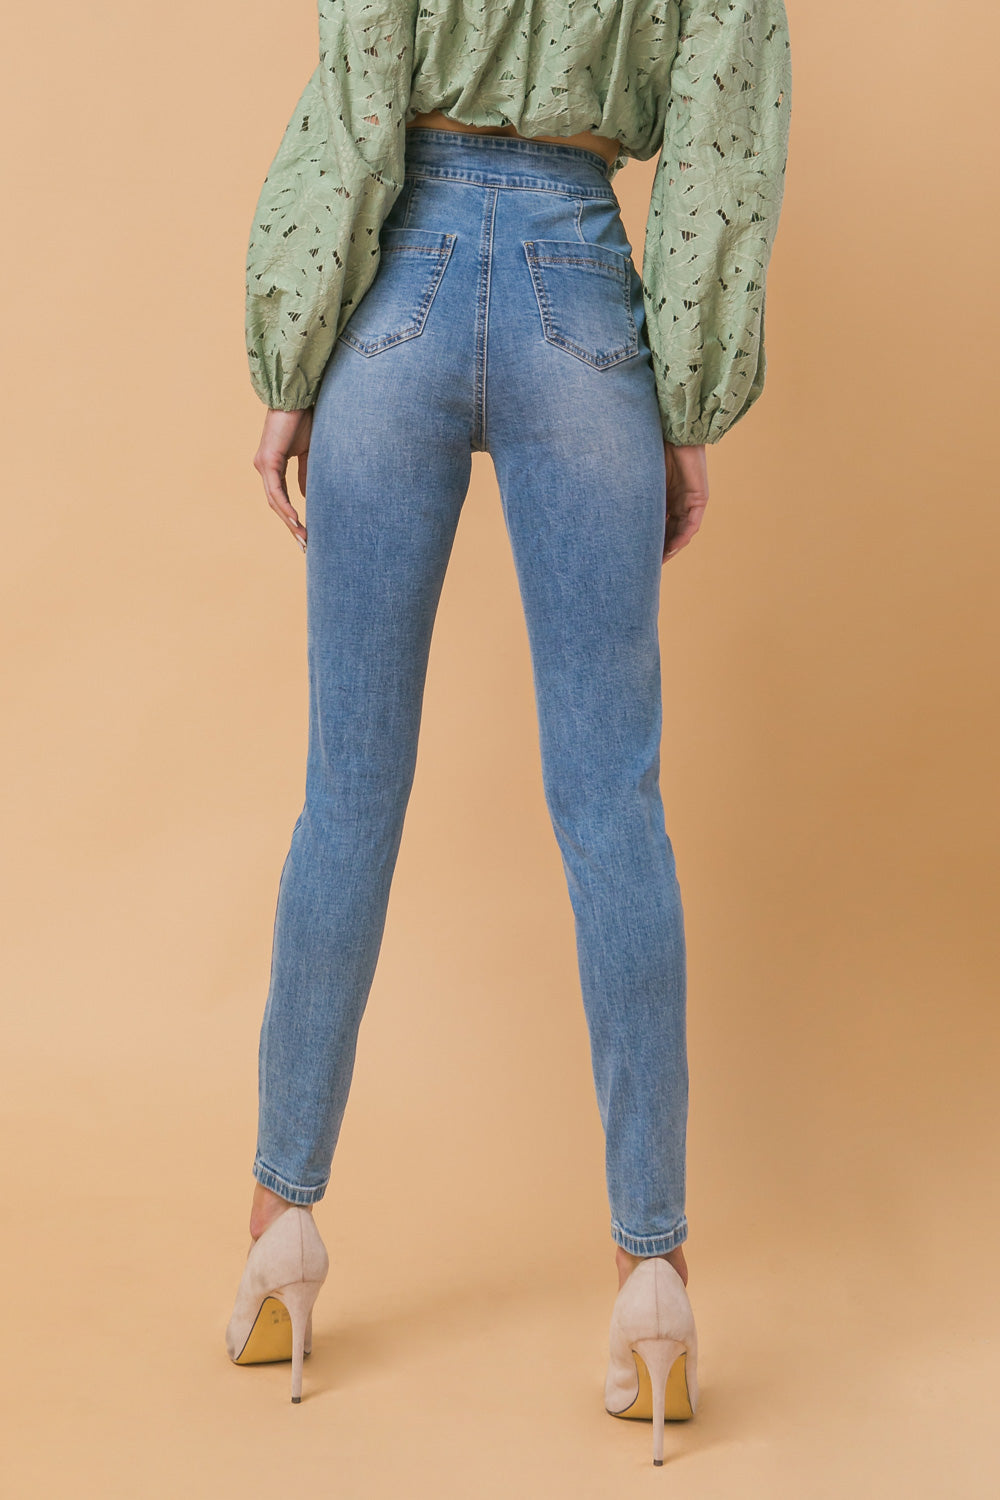 LUCKY STARS LIGHT WASH HIGH WAISTED SKINNY JEANS